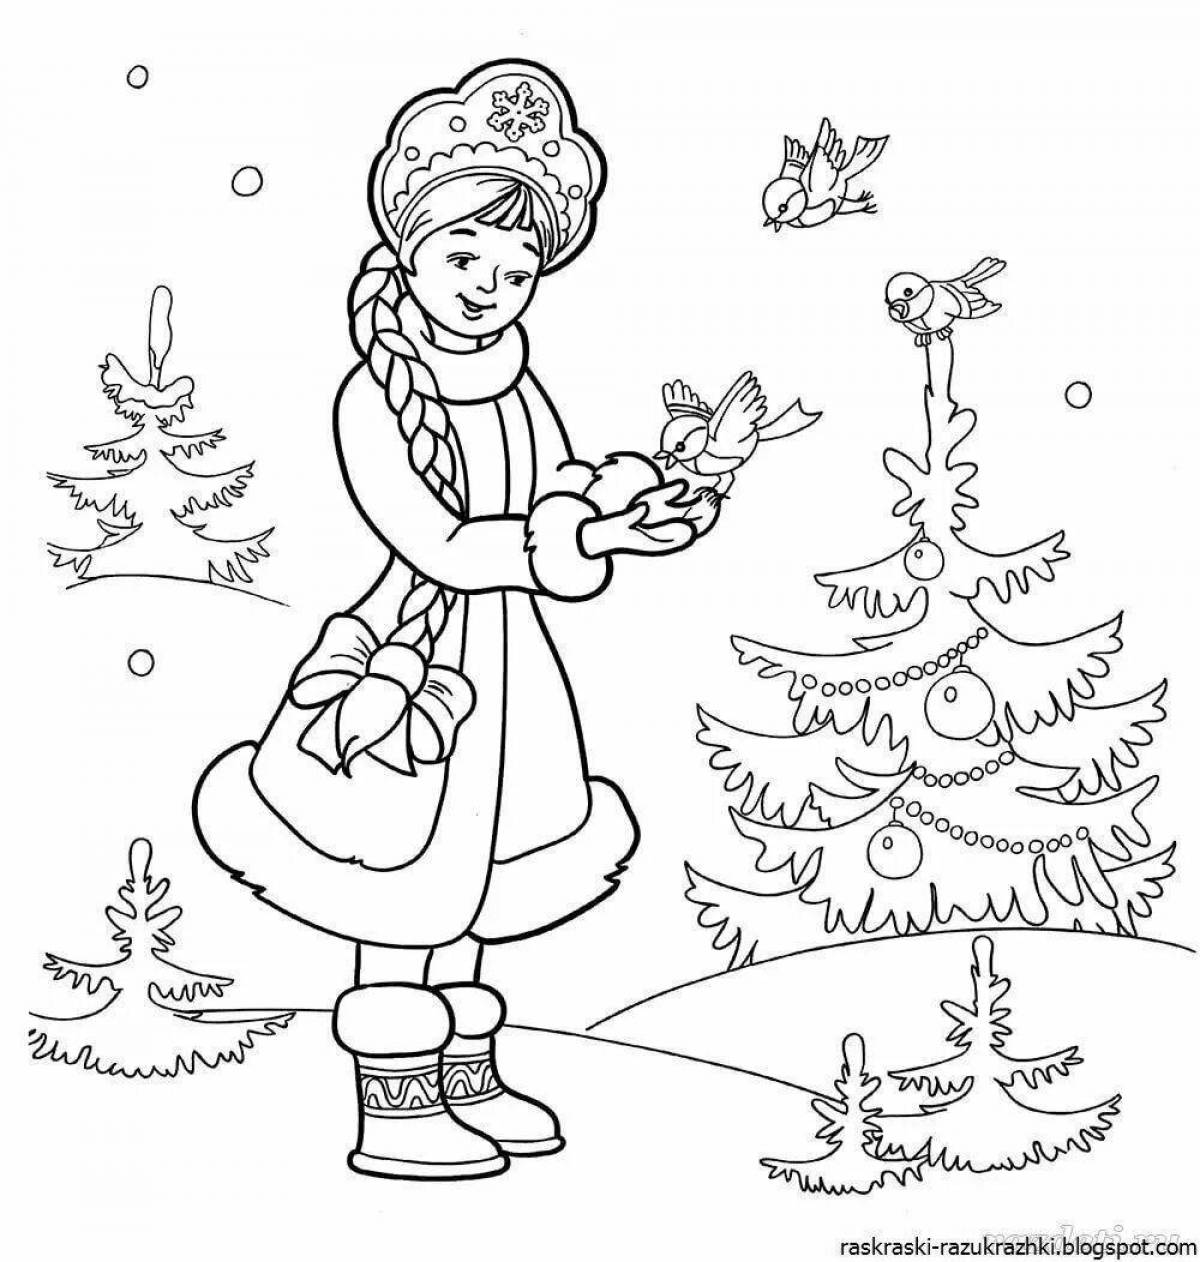 Coloring page merry snow maiden